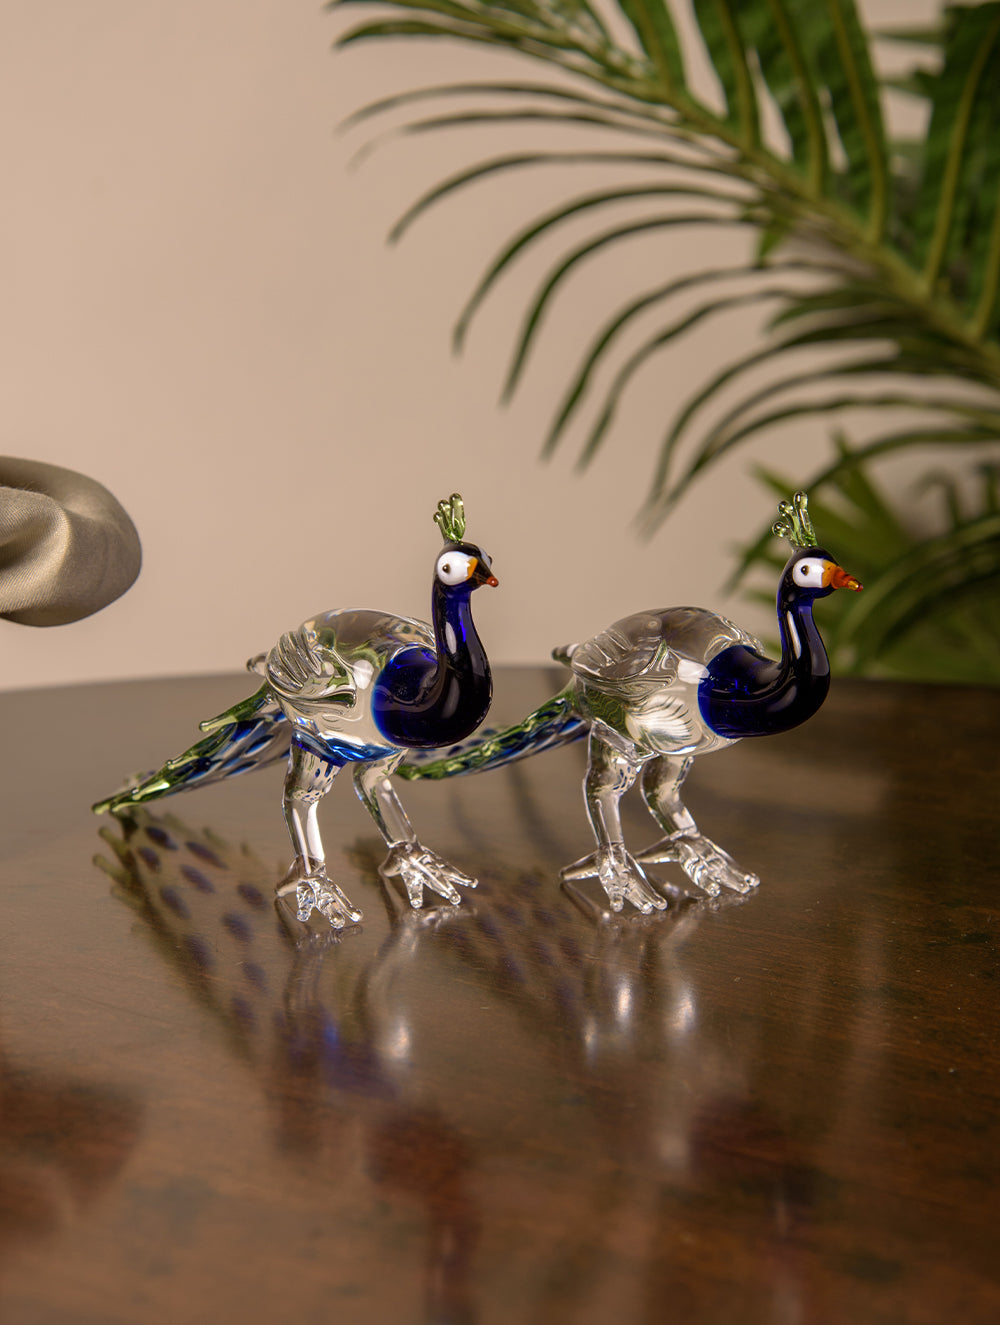 Load image into Gallery viewer, Fine Glass Curio - The Peacocks (Set of 2, Medium)